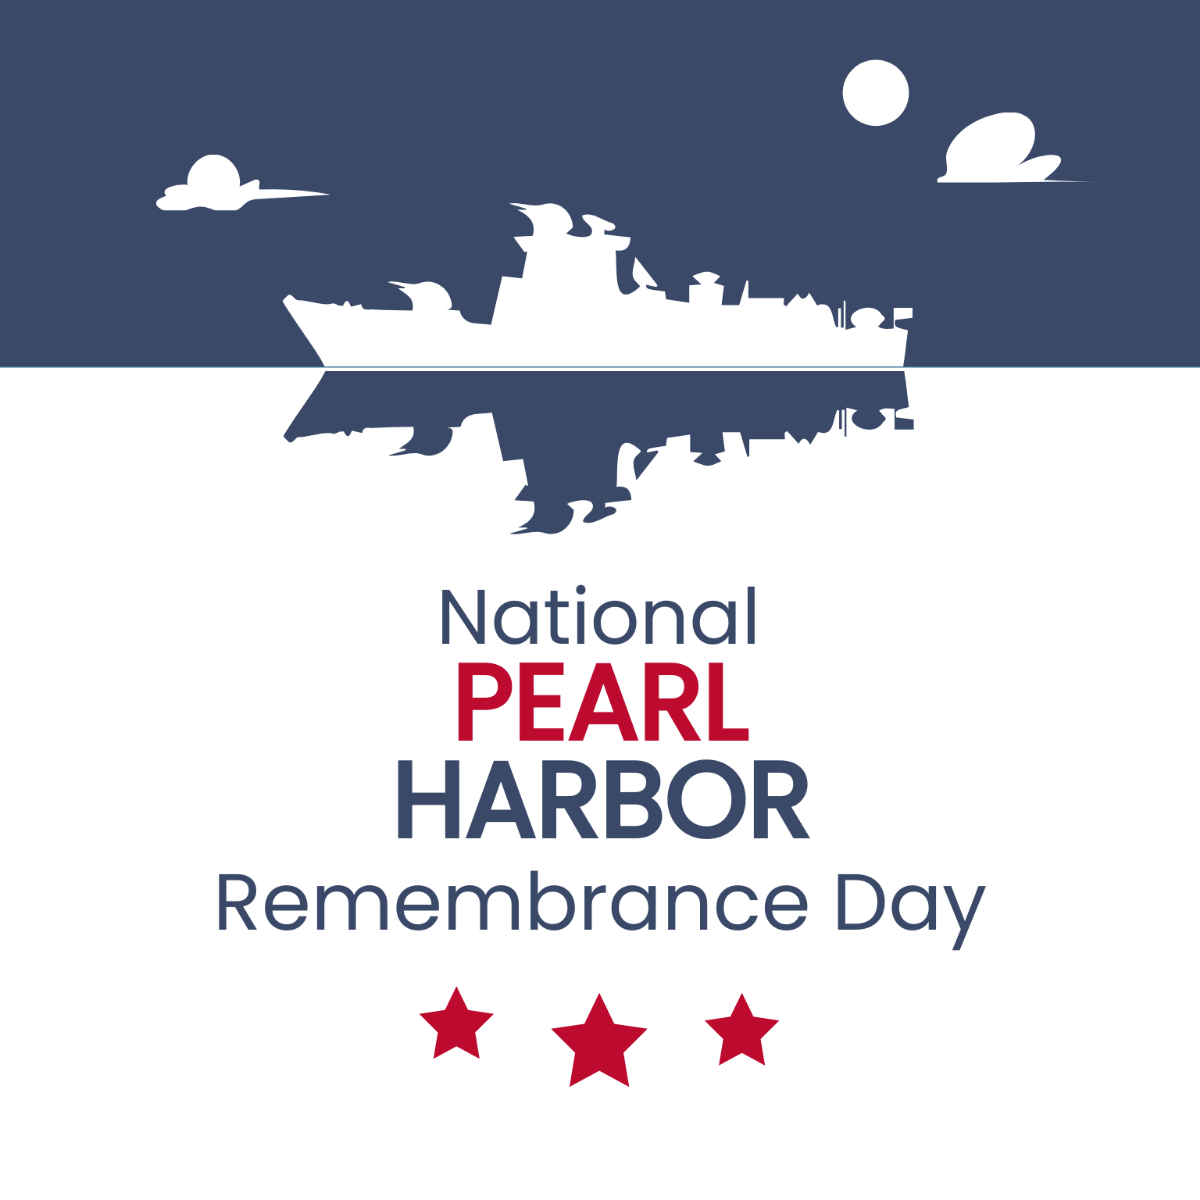 National Pearl Harbor Remembrance Day Poster Vector Template